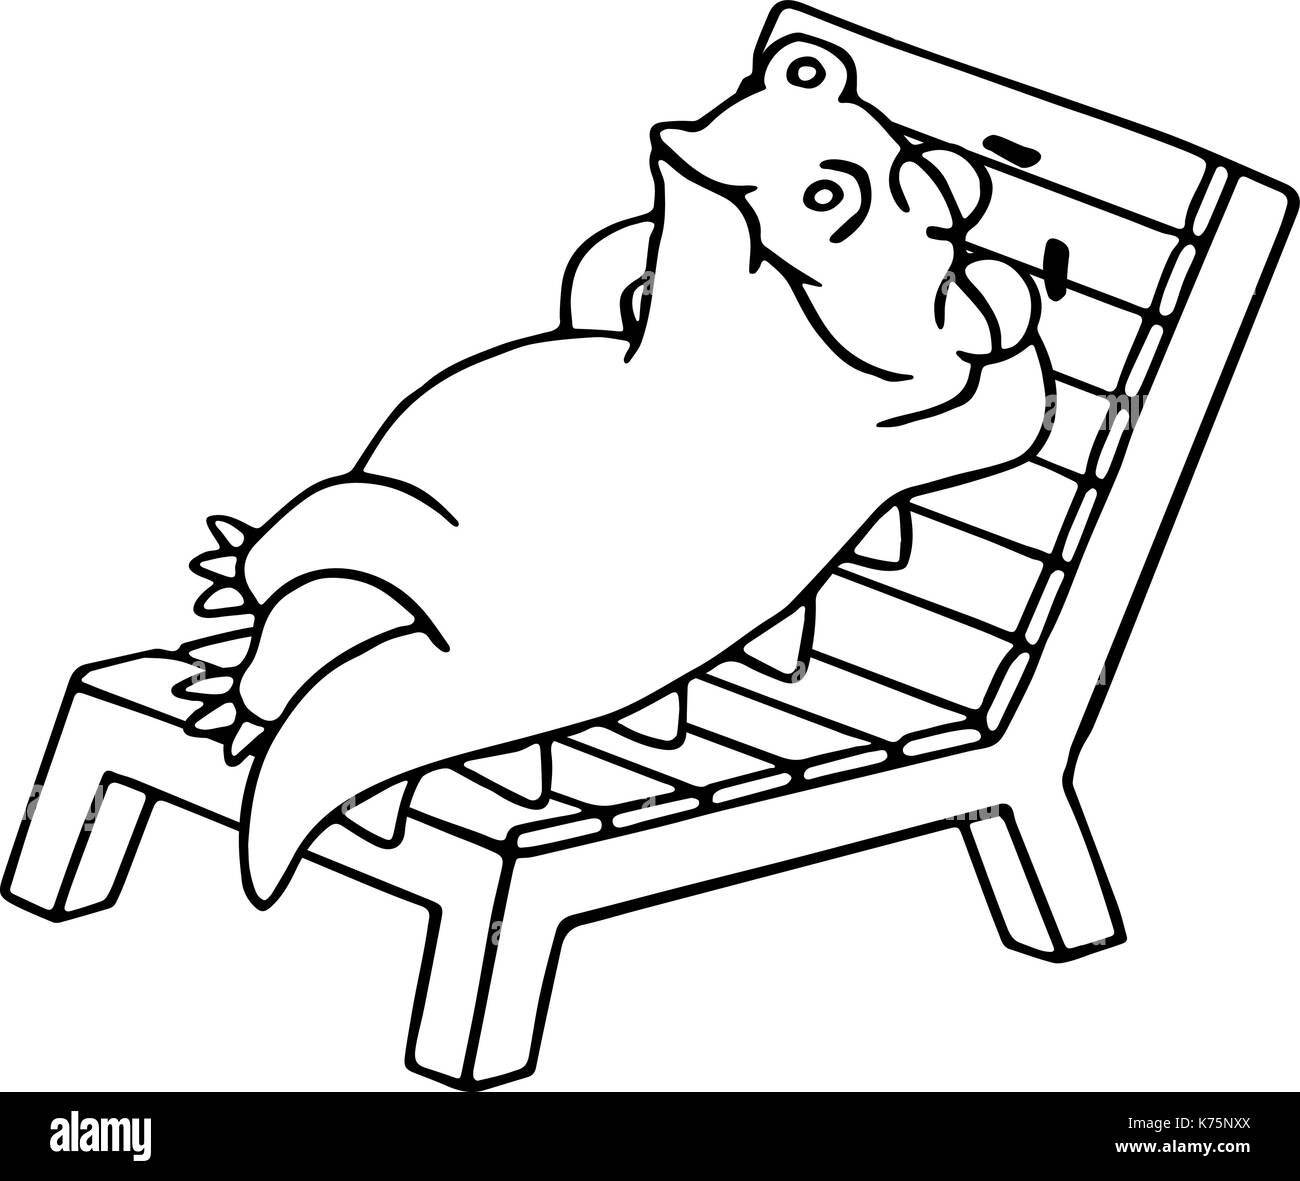 Dinosaur lays on a deck-chair. Vector illustration. Funny imaginary character. Chair on a separate layer. Stock Vector